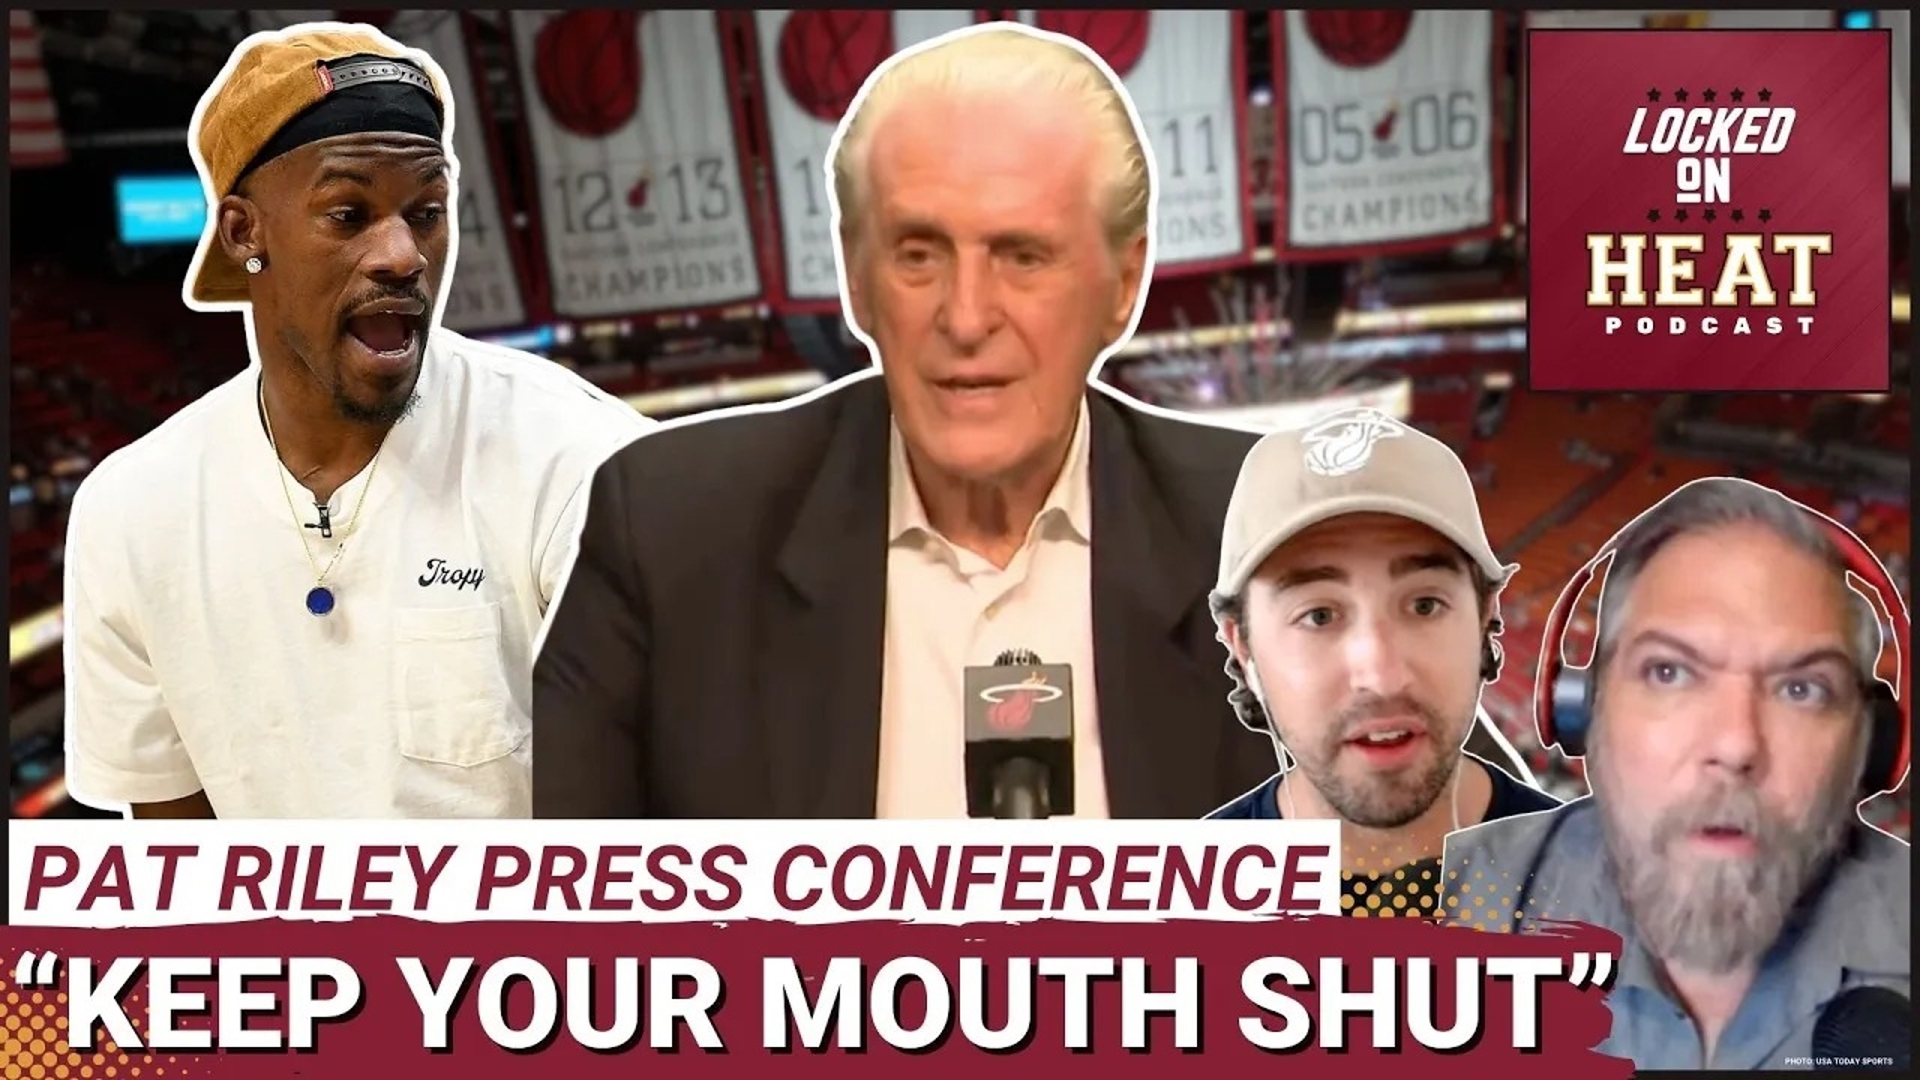 Miami Heat president Pat Riley set off alarms when he responded to Jimmy Butler’s recent comments about the NBA playoffs.